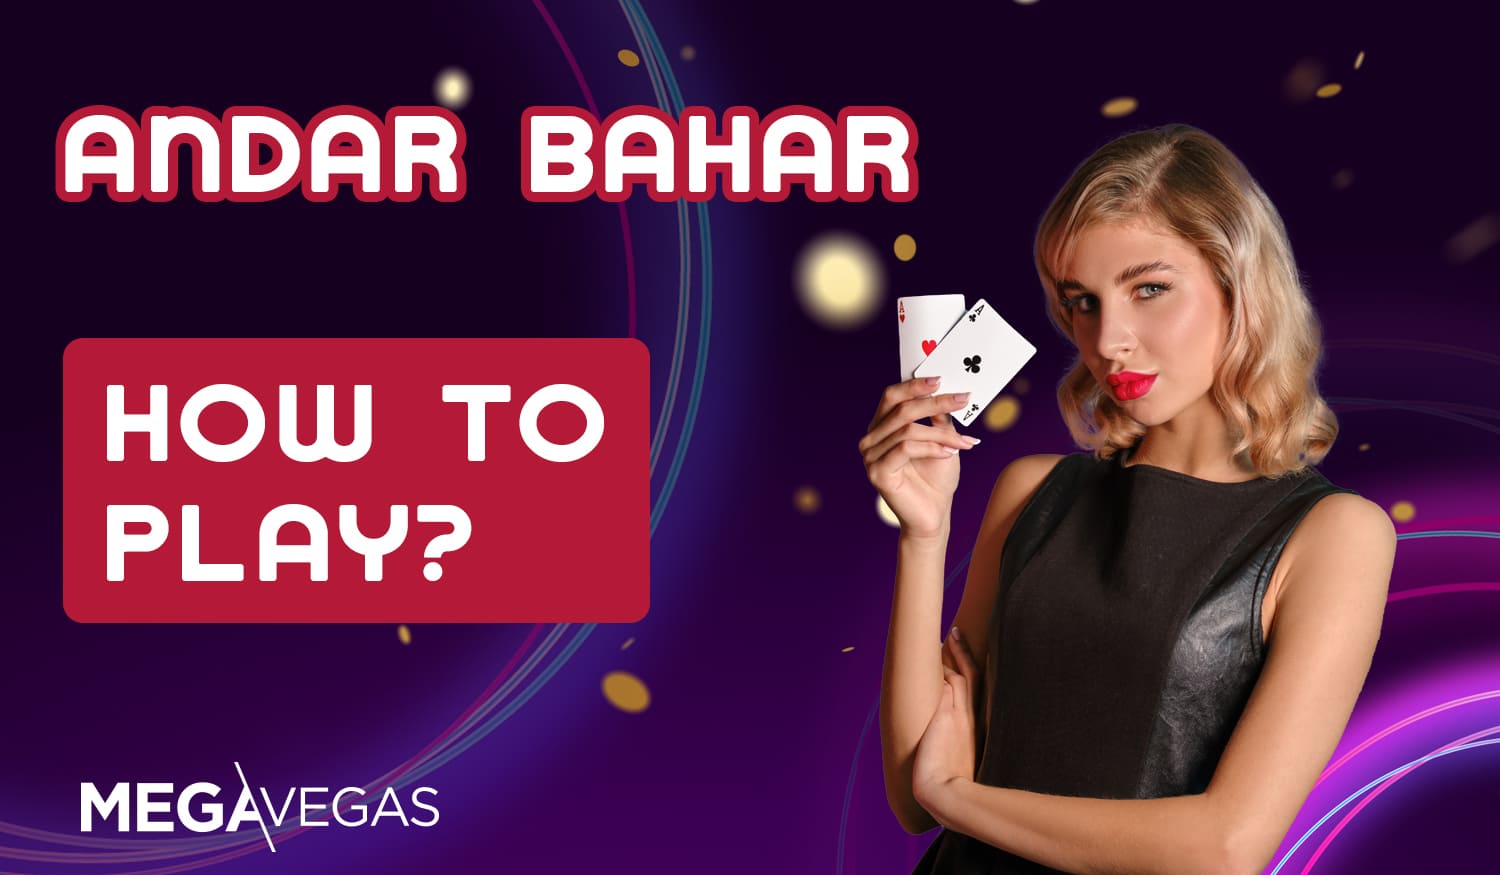 Step by step instructions for Mega Vegas users from India to start playing Andar Bahar